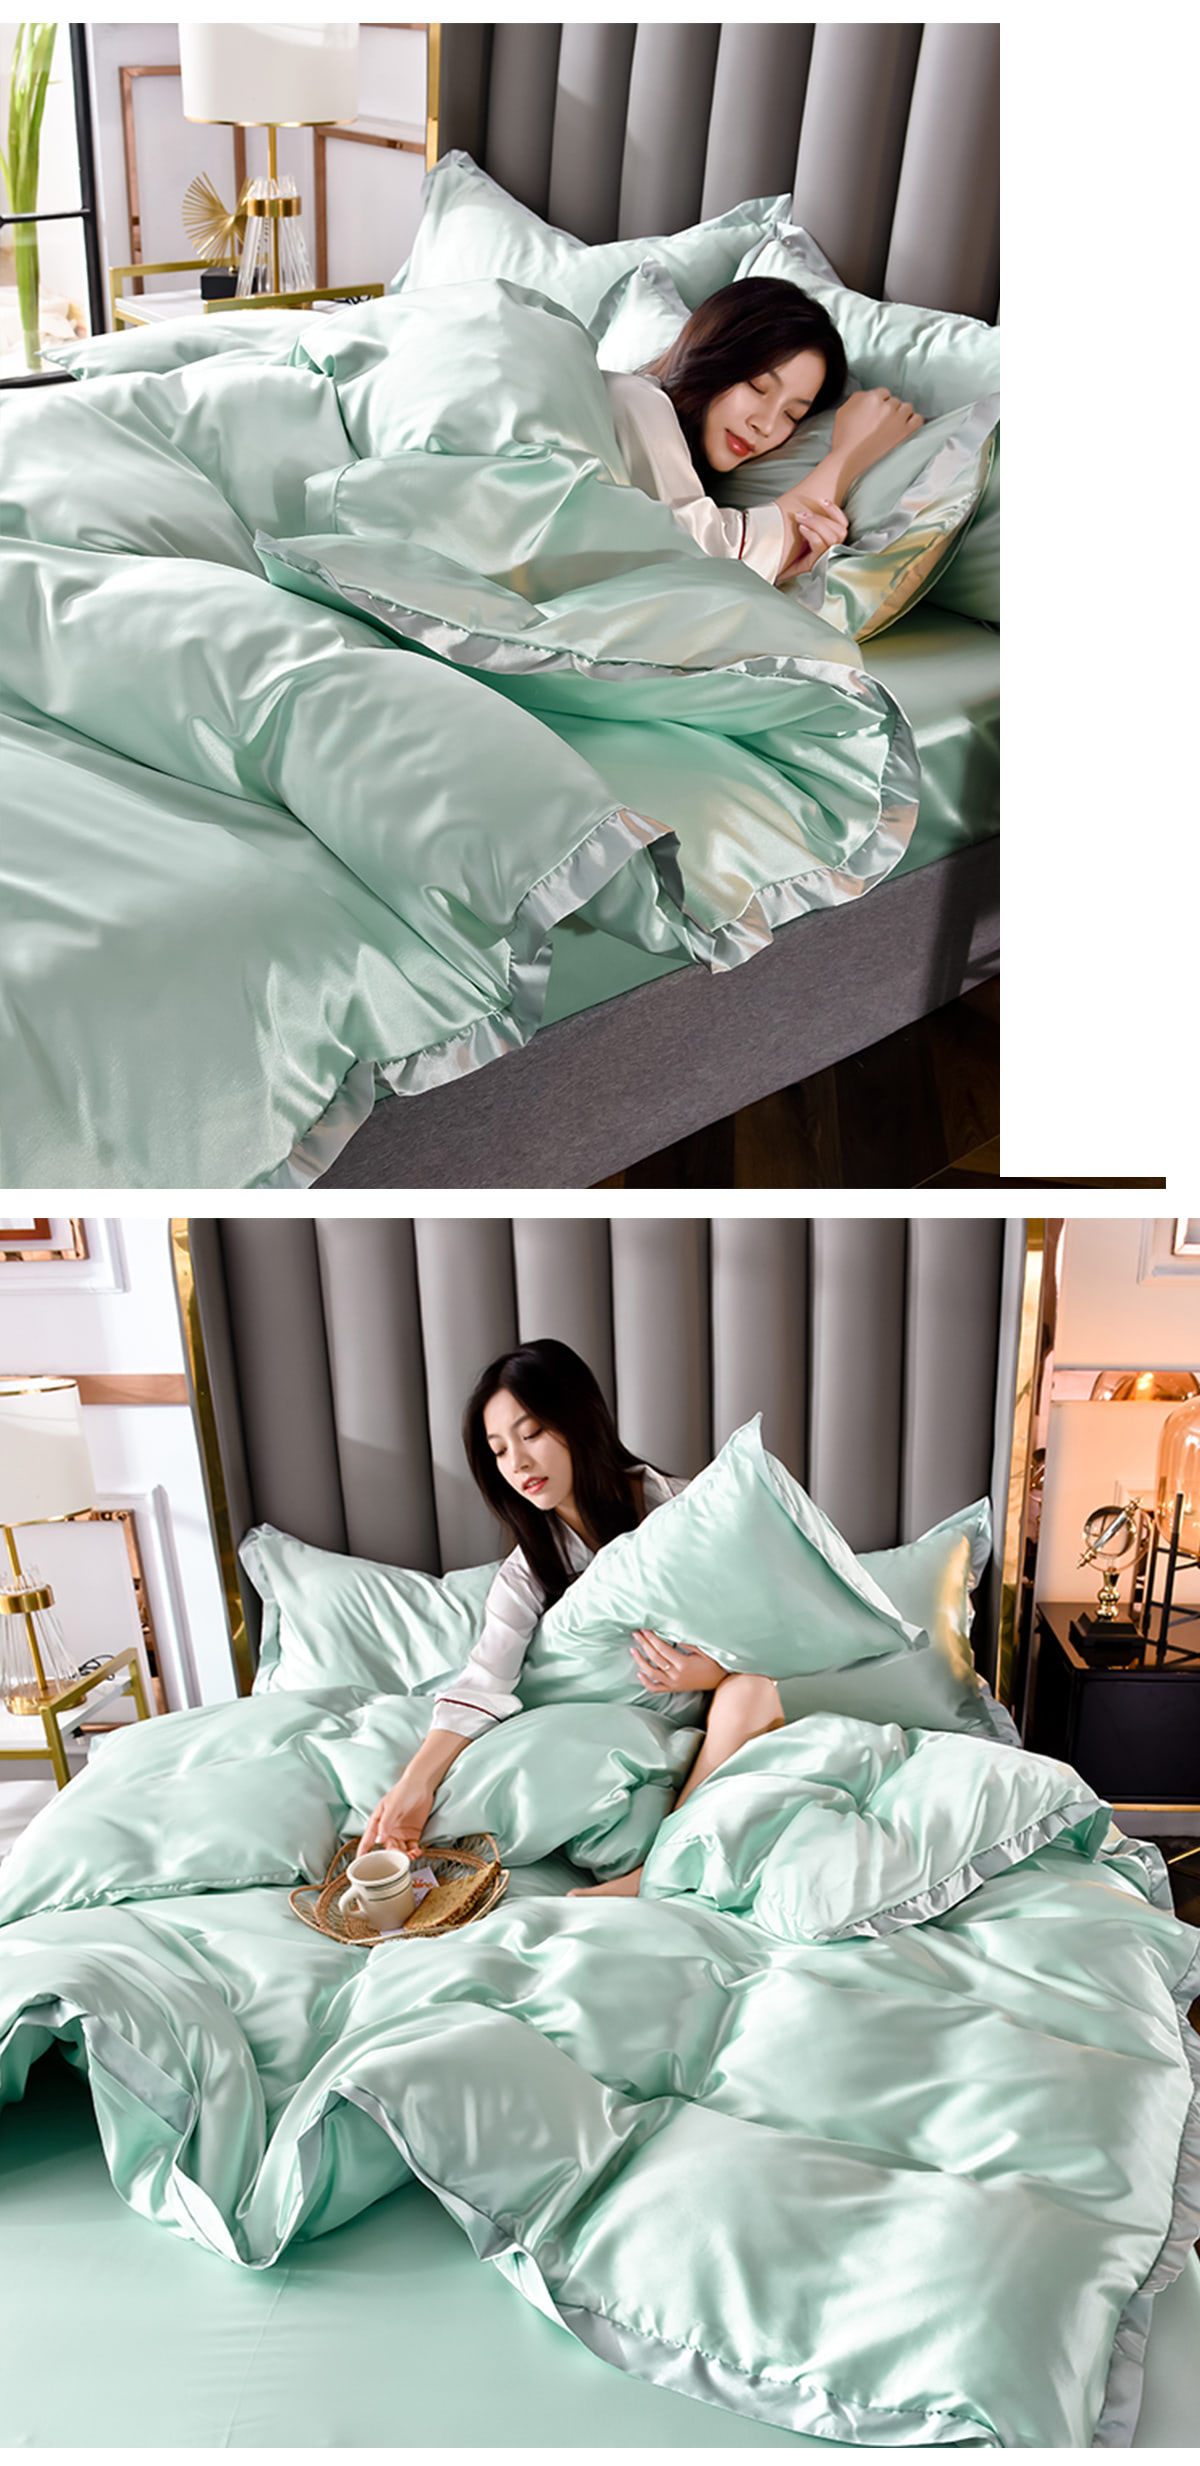 Fresh-and-Soft-Comfortable-Satin-Bed-Cover-Sheet-Set24.jpg